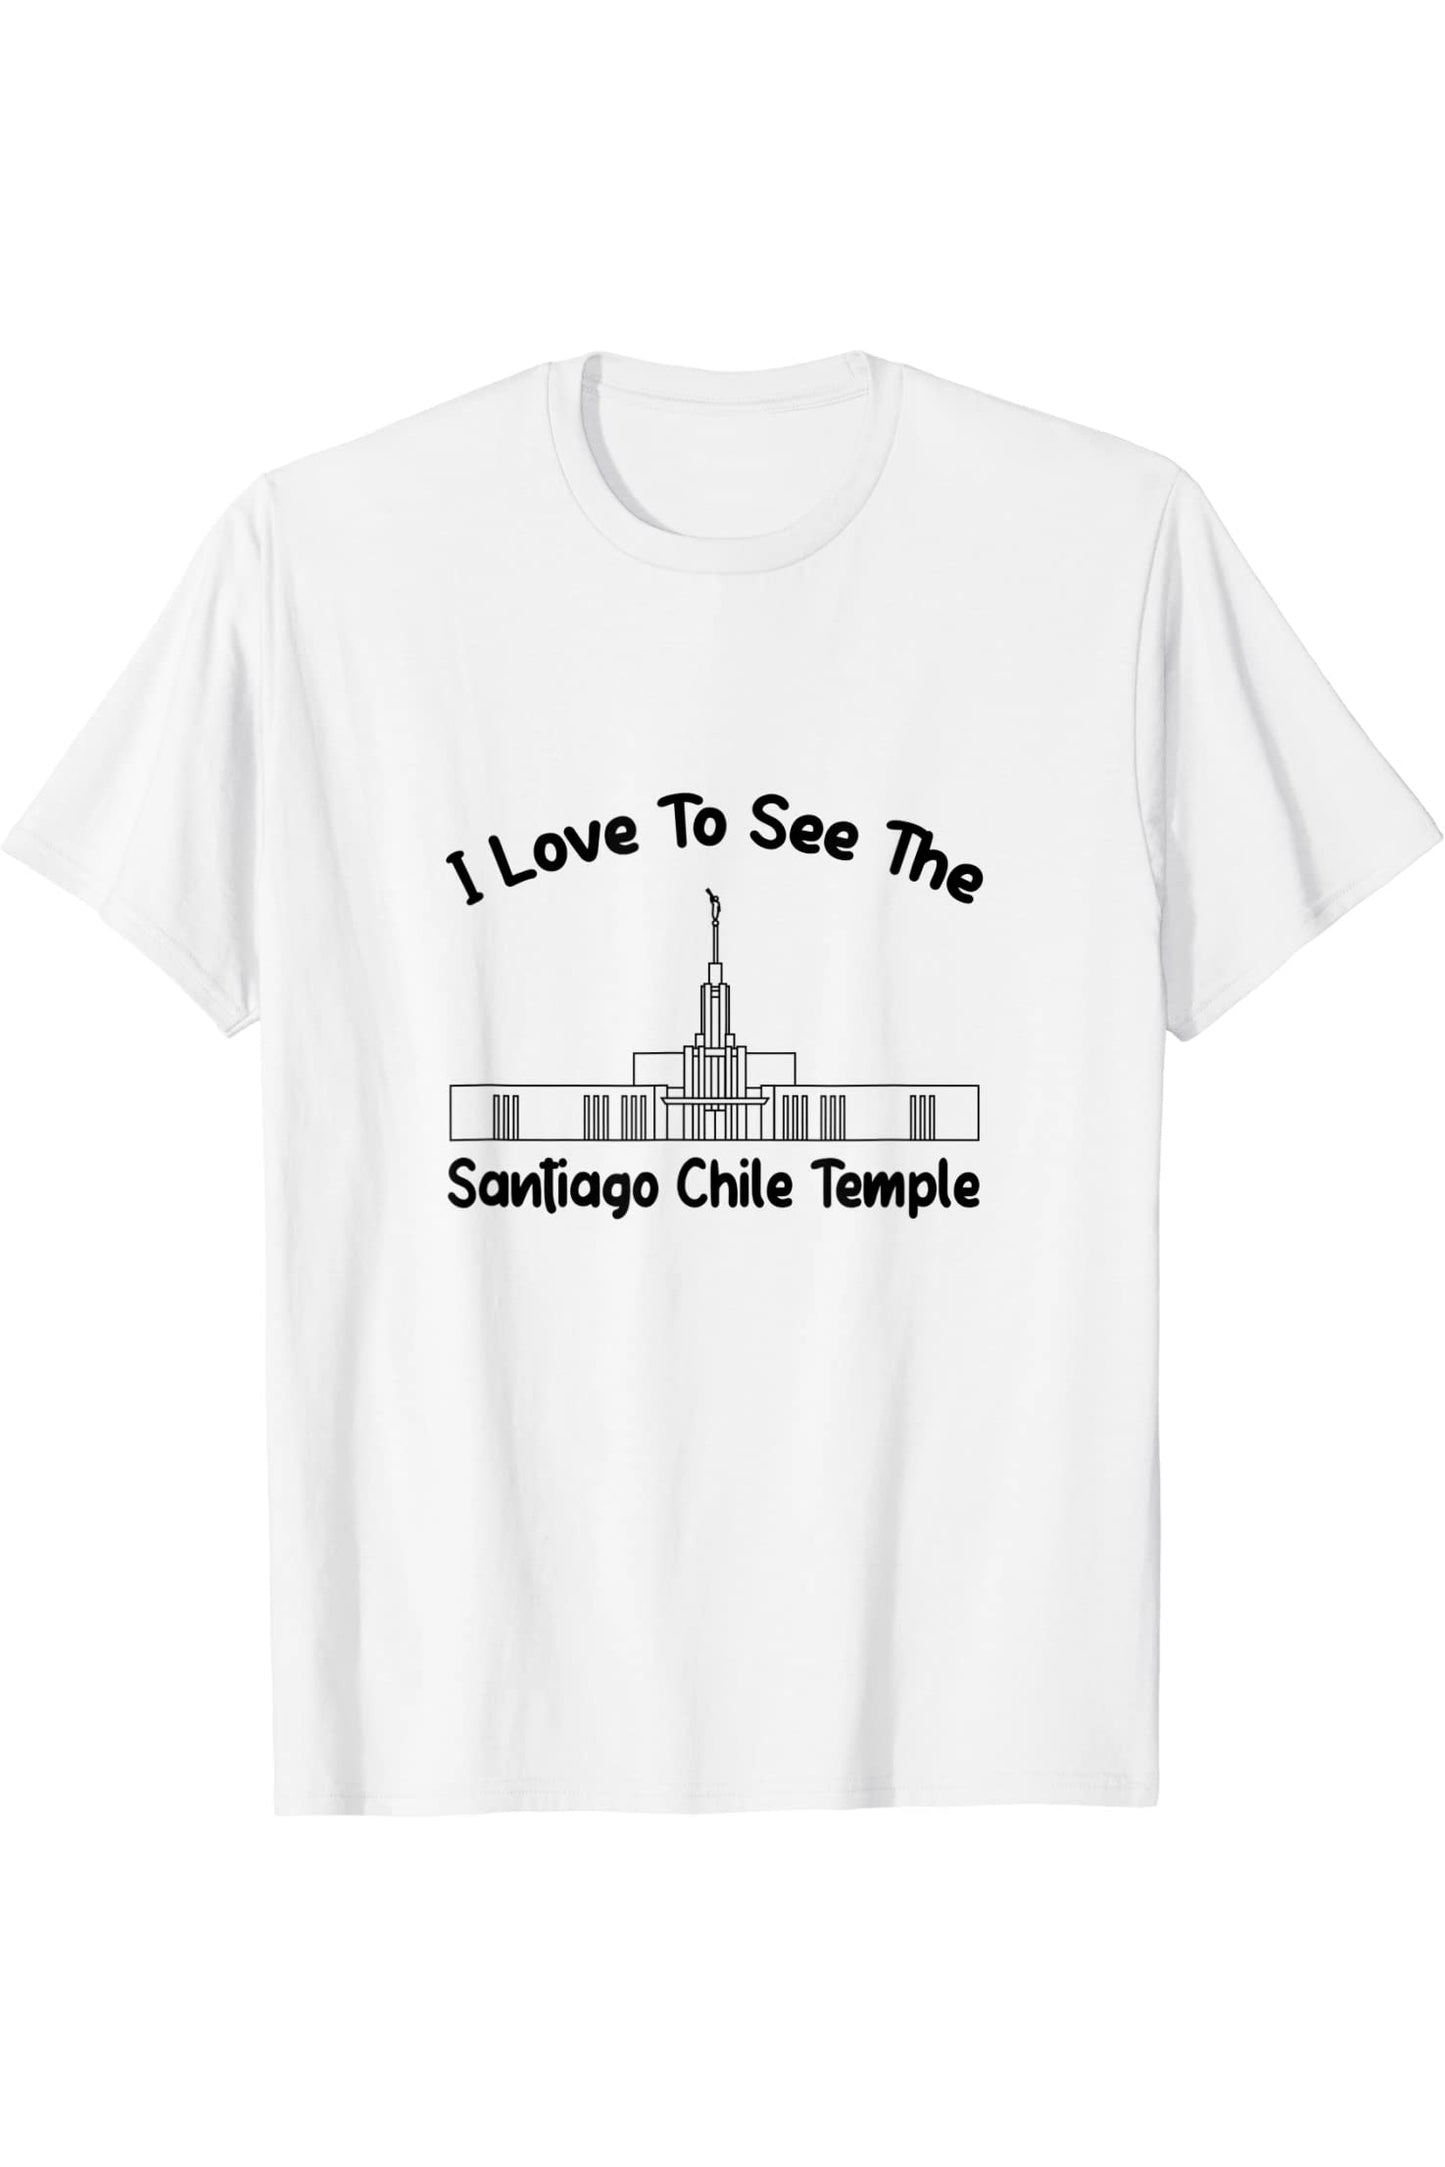 Santiago Chile Temple T-Shirt - Primary Style (English) US